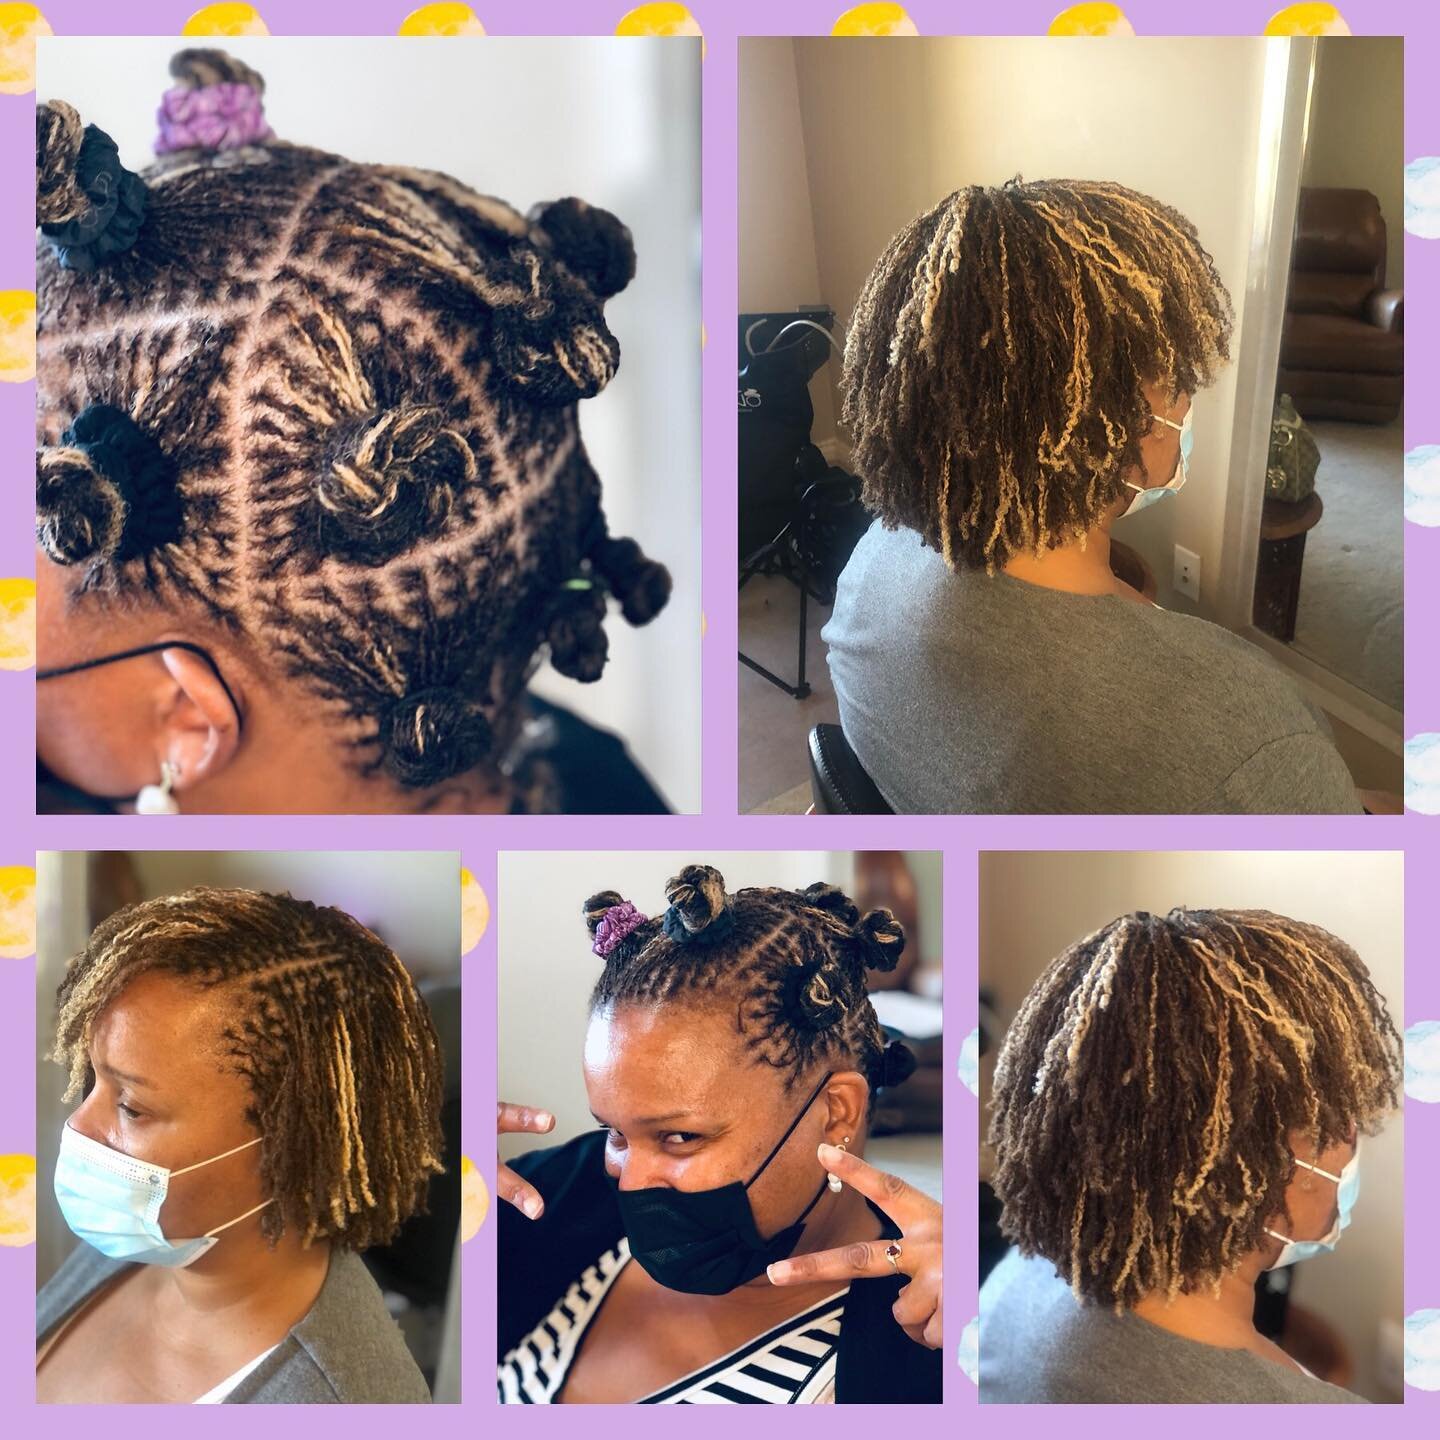 About 4 month in after install day! I didn&rsquo;t do this color although it&rsquo;s beautiful. Her sister is a stylist. I do her locks to 😉#phoenixsisterlocks #sisterlocksinphoenix #sisterlocksarizona #sisterlocksaz #sisterlocksphoenix